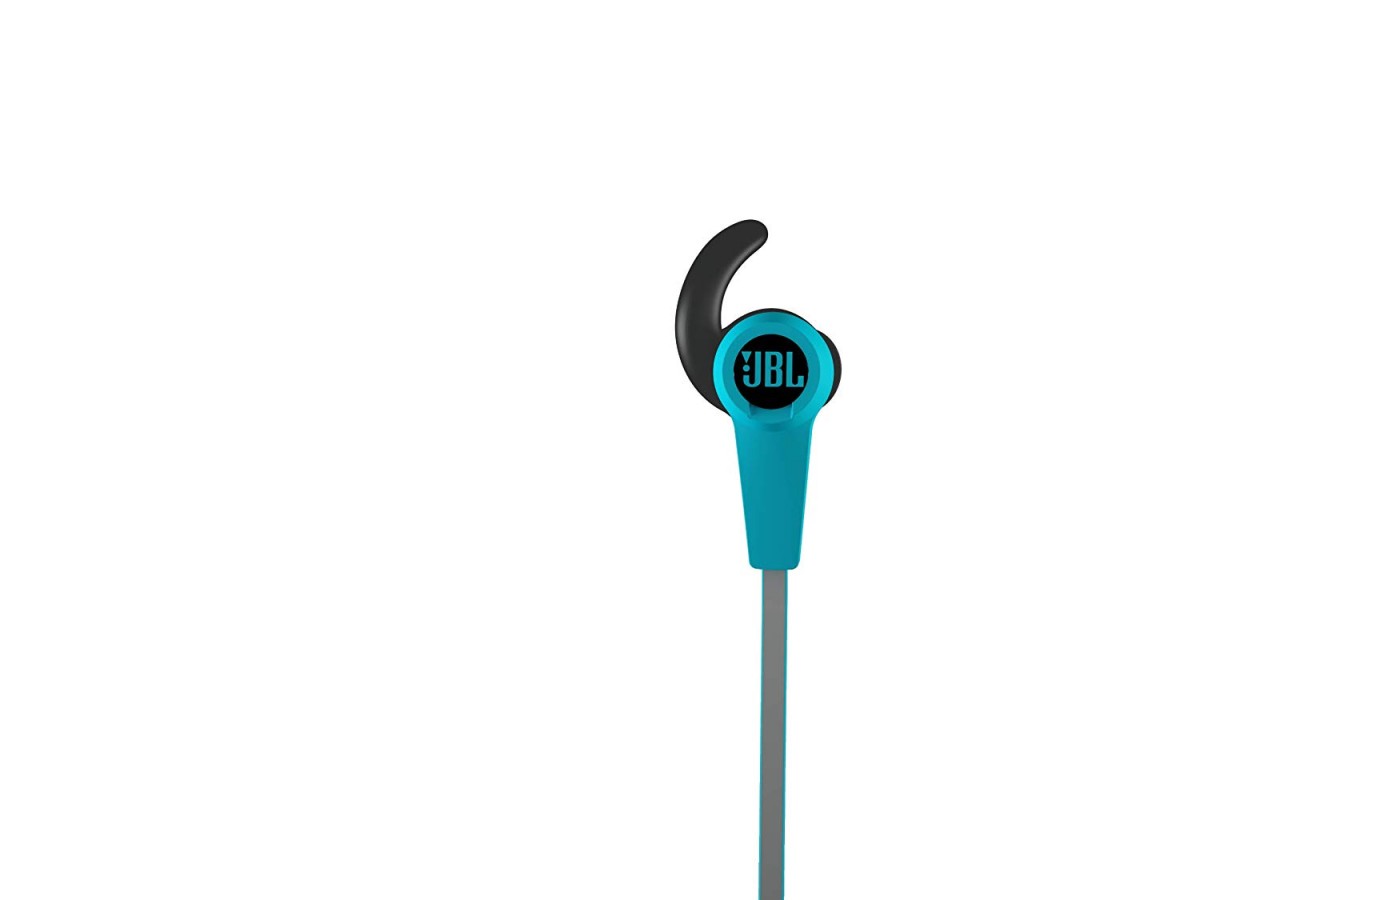 The package includes in-ear Bluetooth earphones.